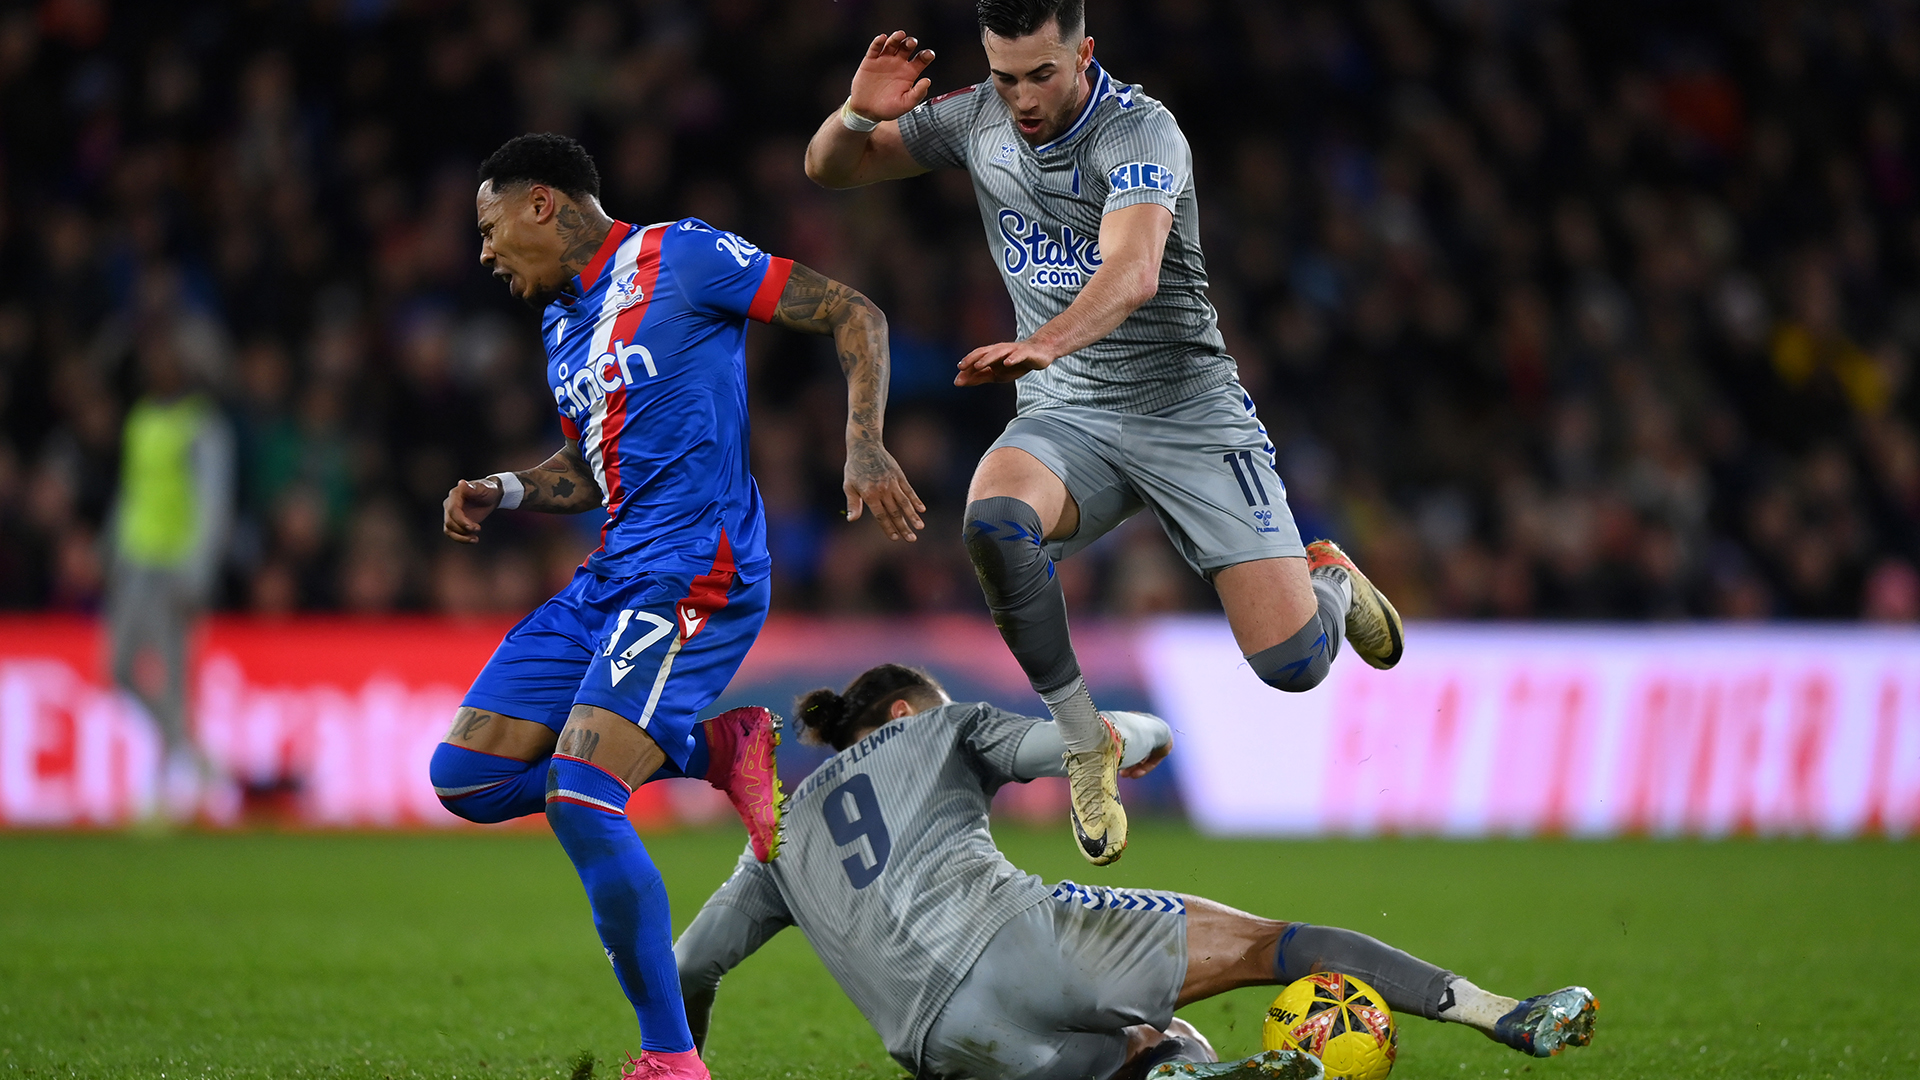 Nathaniel Clyne of Crystal Palace is challenged by Dominic Calvert-Lewin and Jack Harrison of Everton, leading to a red card for Dominic Calvert-Lewin, during the Emirates FA Cup Third Round match between Crystal Palace and Everton at Selhurst Park on January 04, 2024 in London, England.